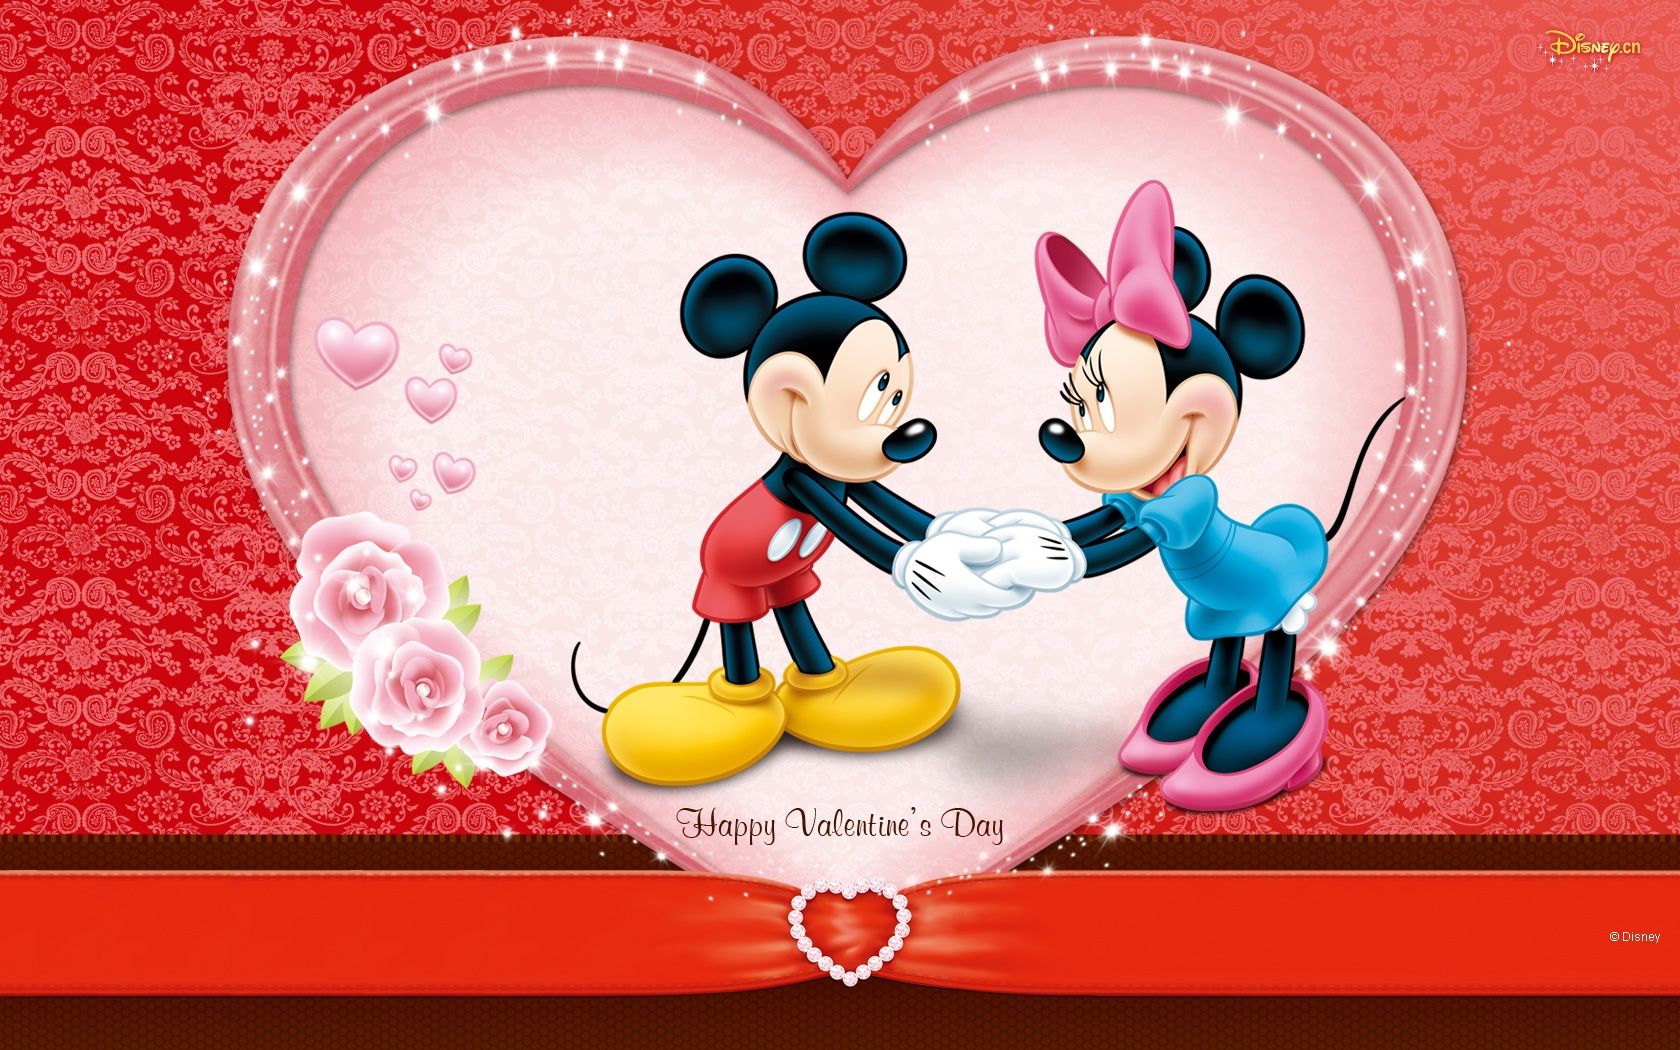 1680x1050 Free Mickey Mouse And Minnie Mouse Love, Download Free Clip Art on WallpaperBat